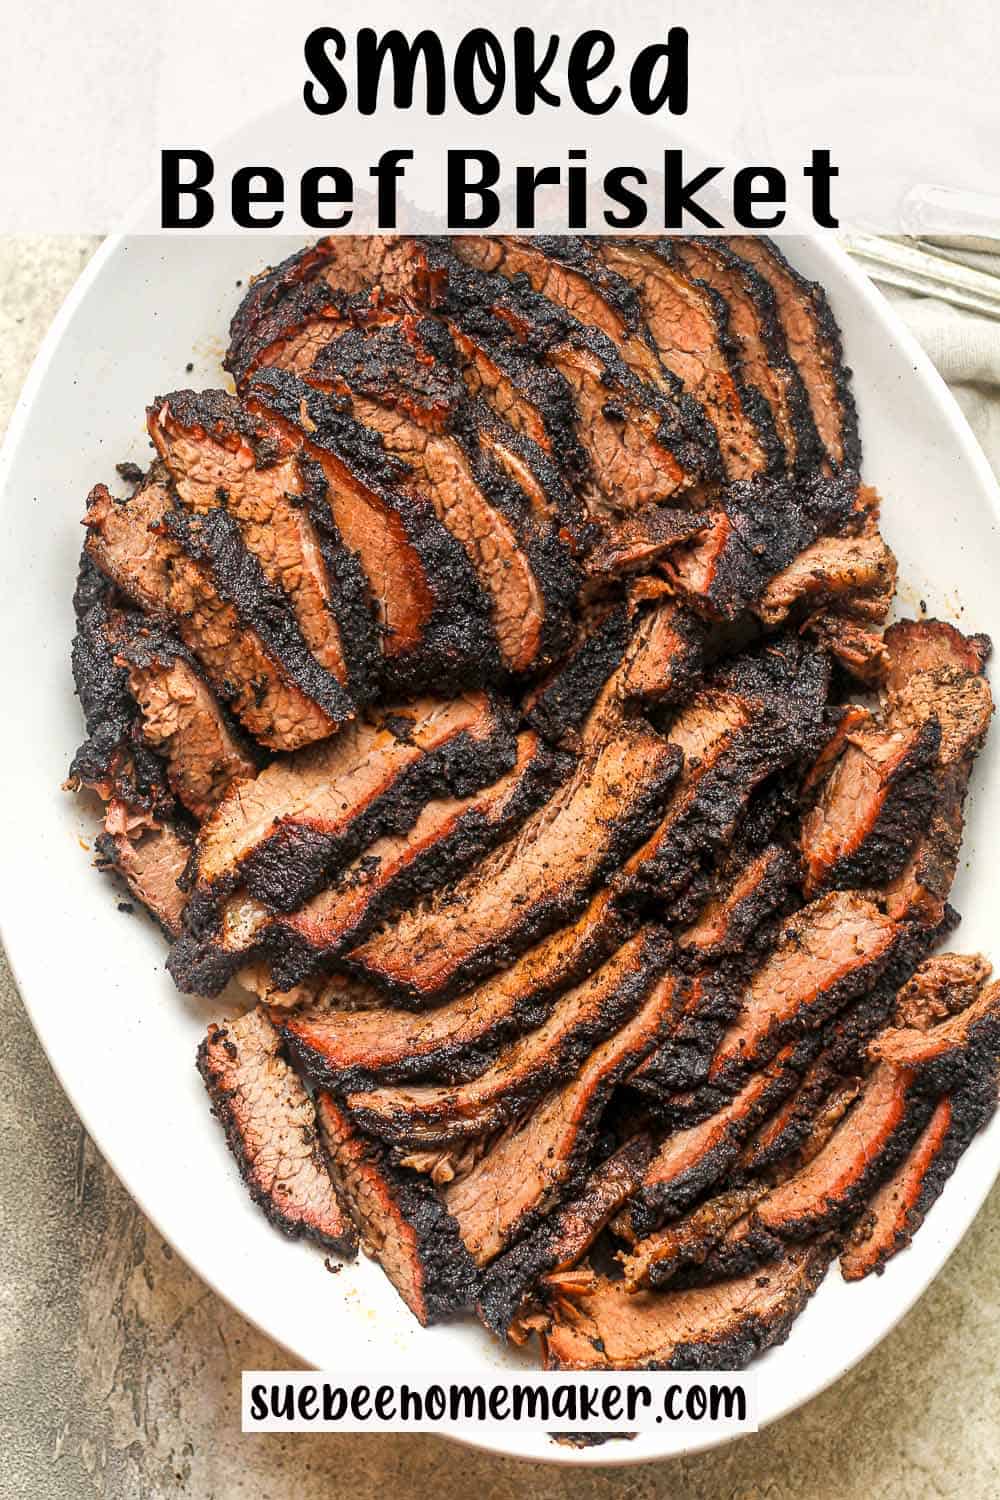 A platter of smoked beef brisket.